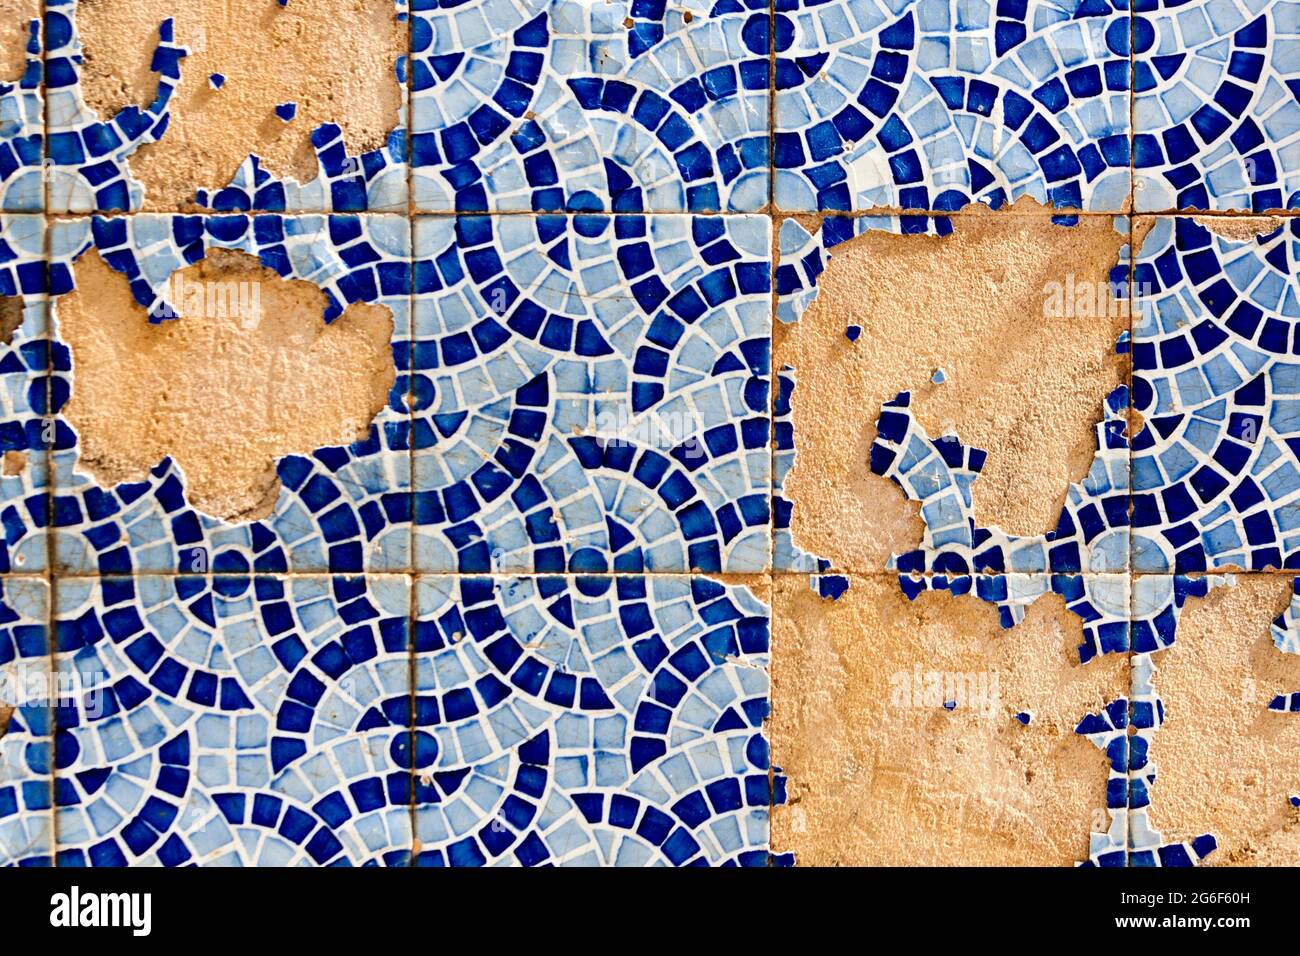 Close up view of a broken tiled wall of small azulejo. Stock Photo